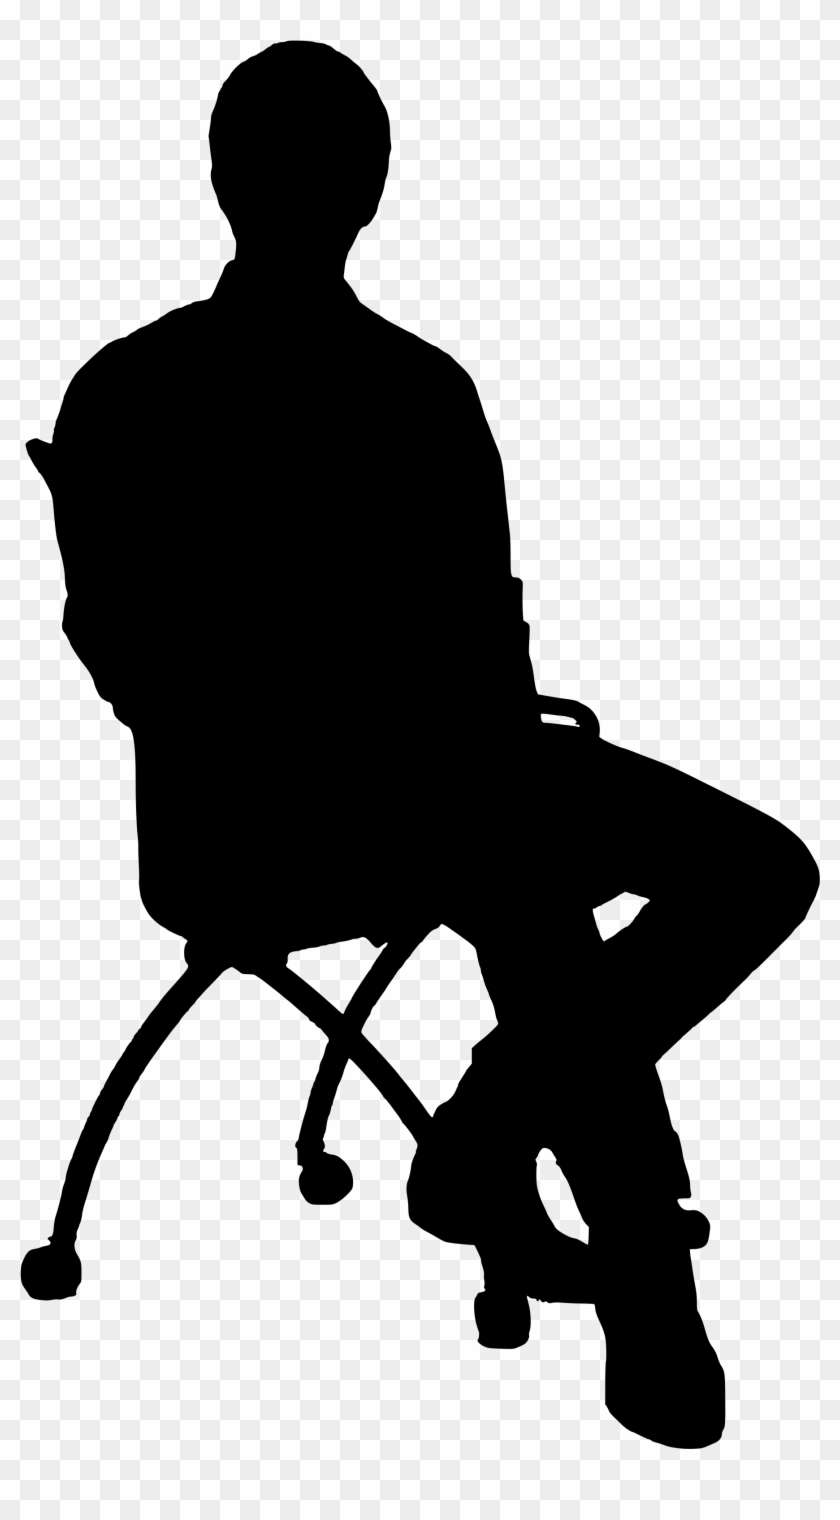 Silhouette Of Man On Chair - Person Sitting In Chair Silhouette #261551